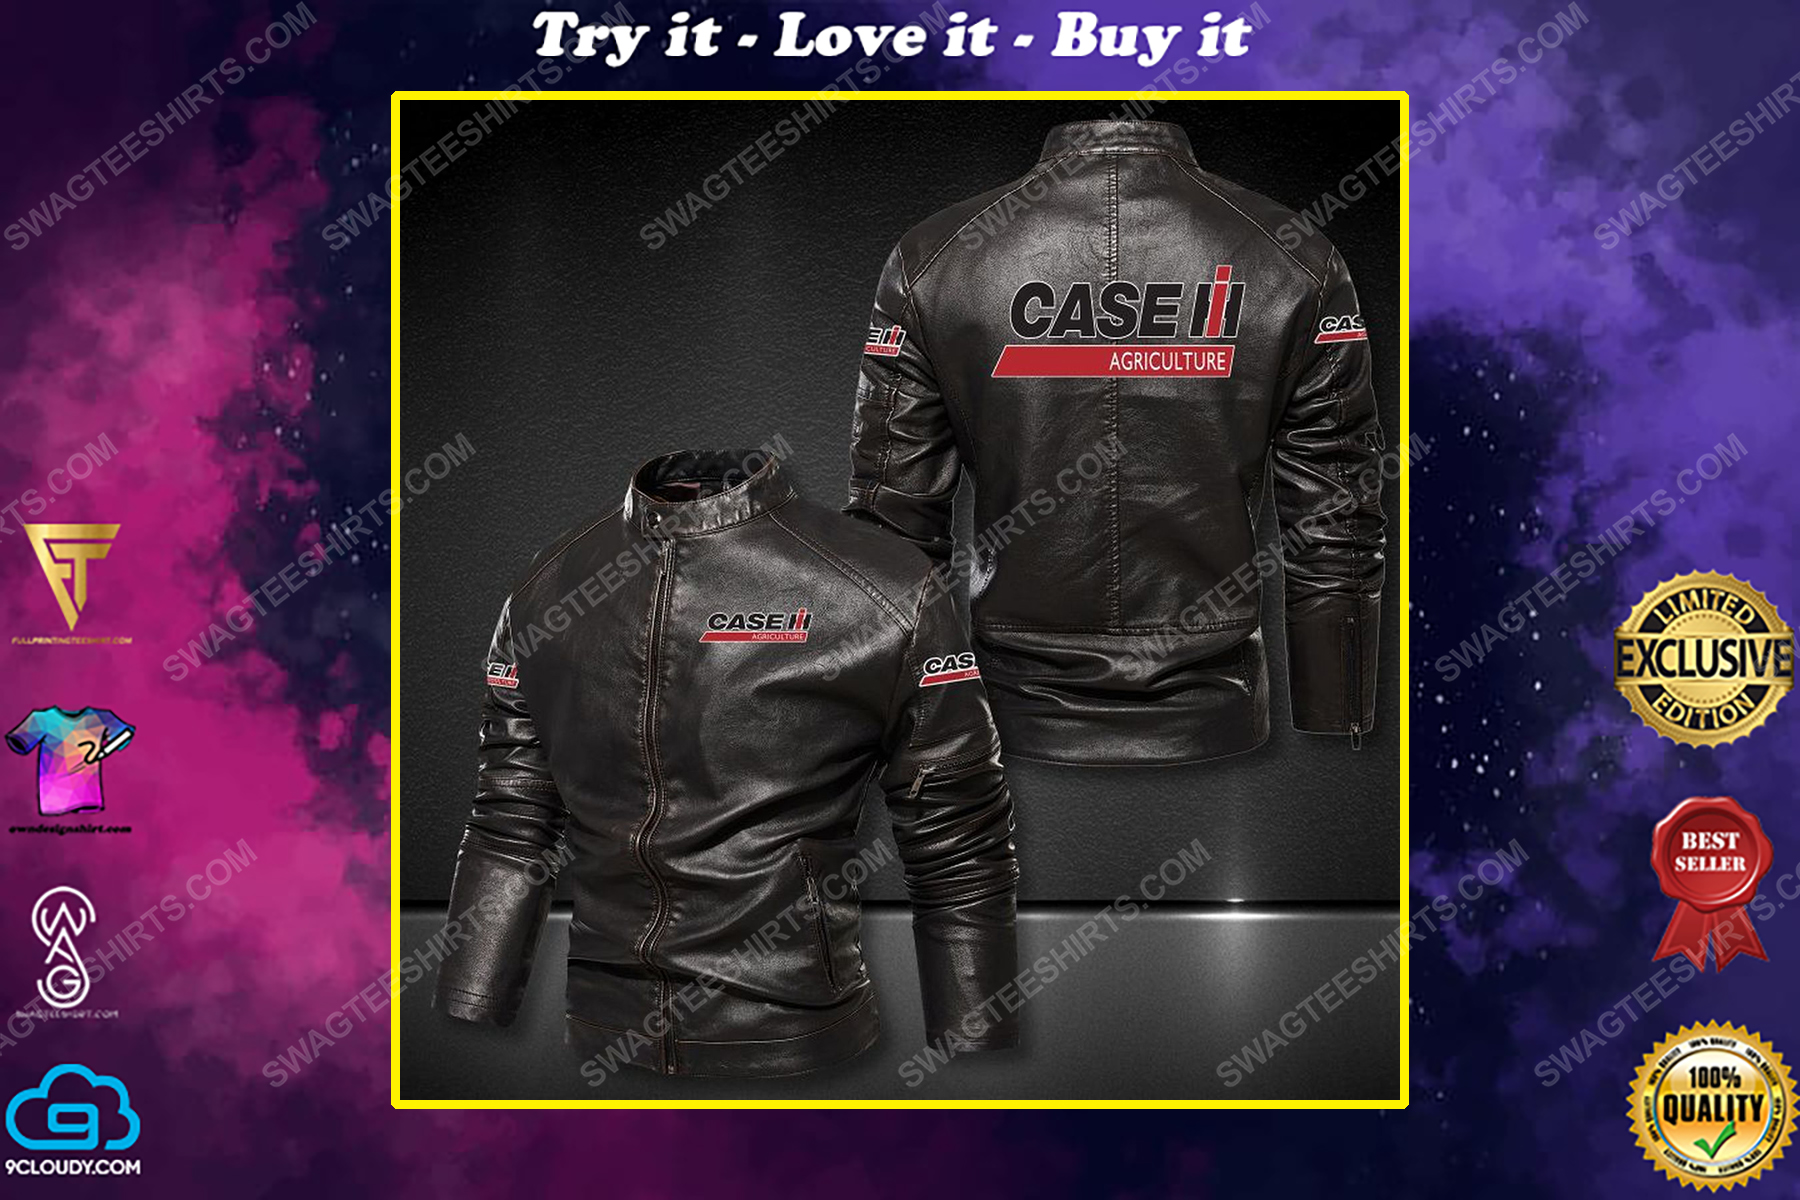 The case ih agriculture sports leather jacket